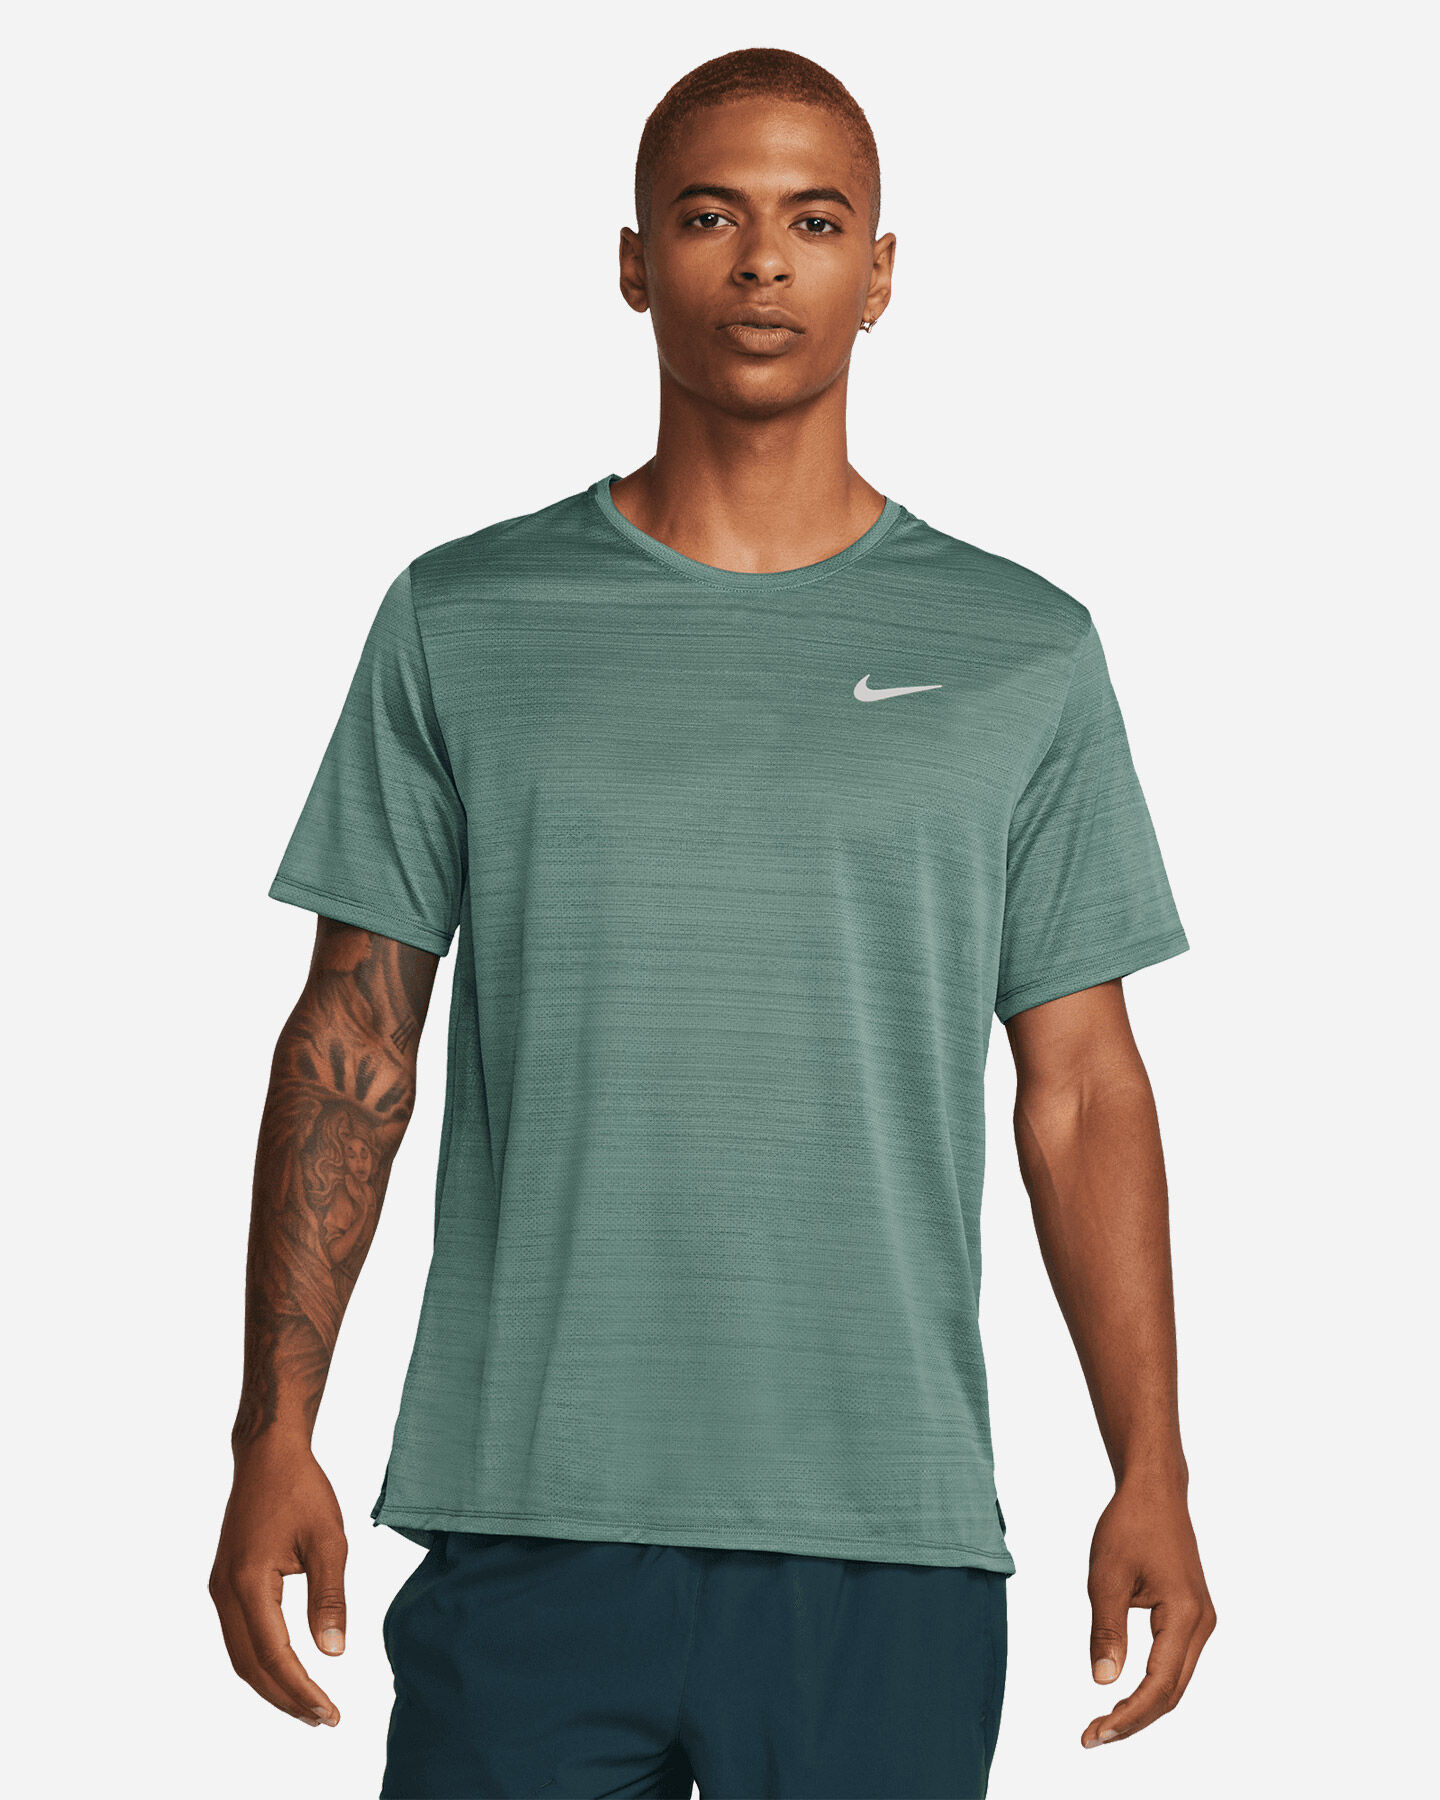  T-Shirt running NIKE DRI FIT MILER M S5687287|361|S scatto 0